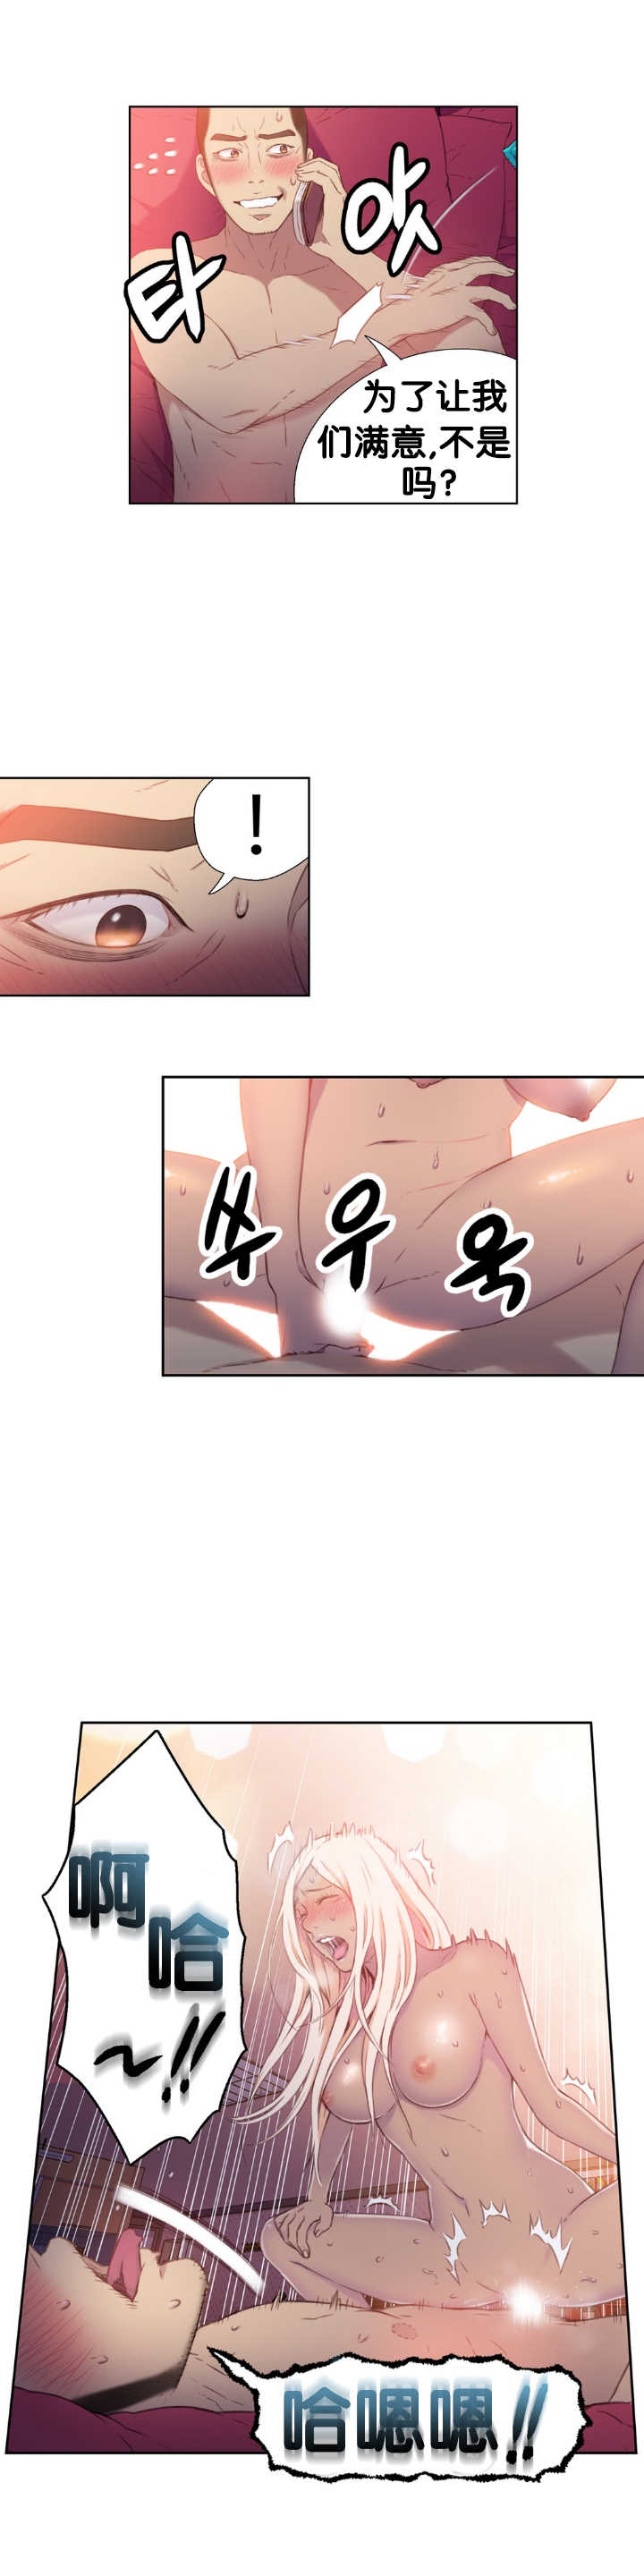 [BAK Hyeong Jun]Sweet Guy Ch.10-12(Chinese)(FITHRPG6) - Page 7